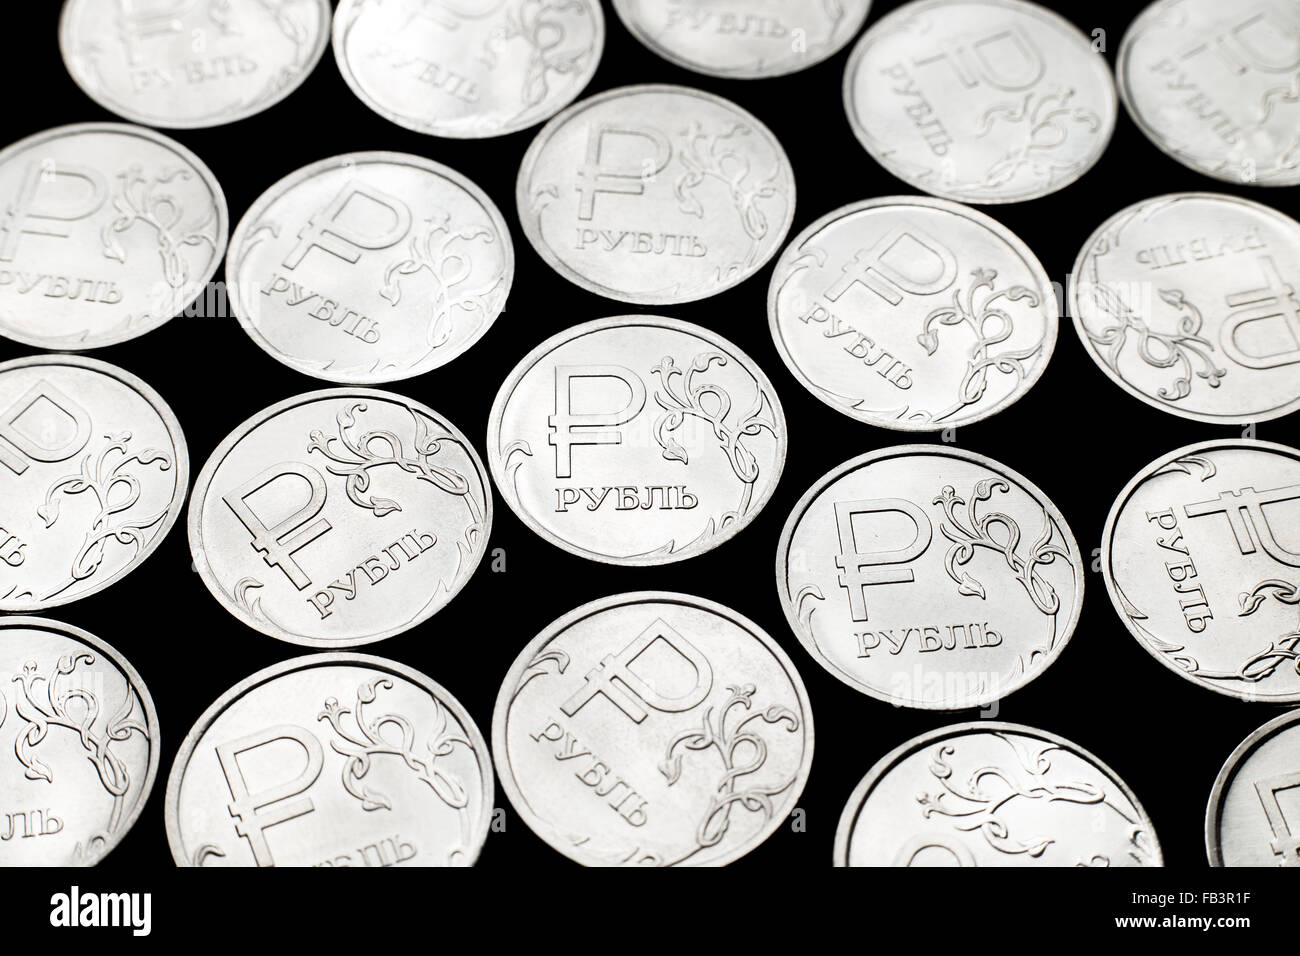 Metal Russian ruble coins on black background Stock Photo